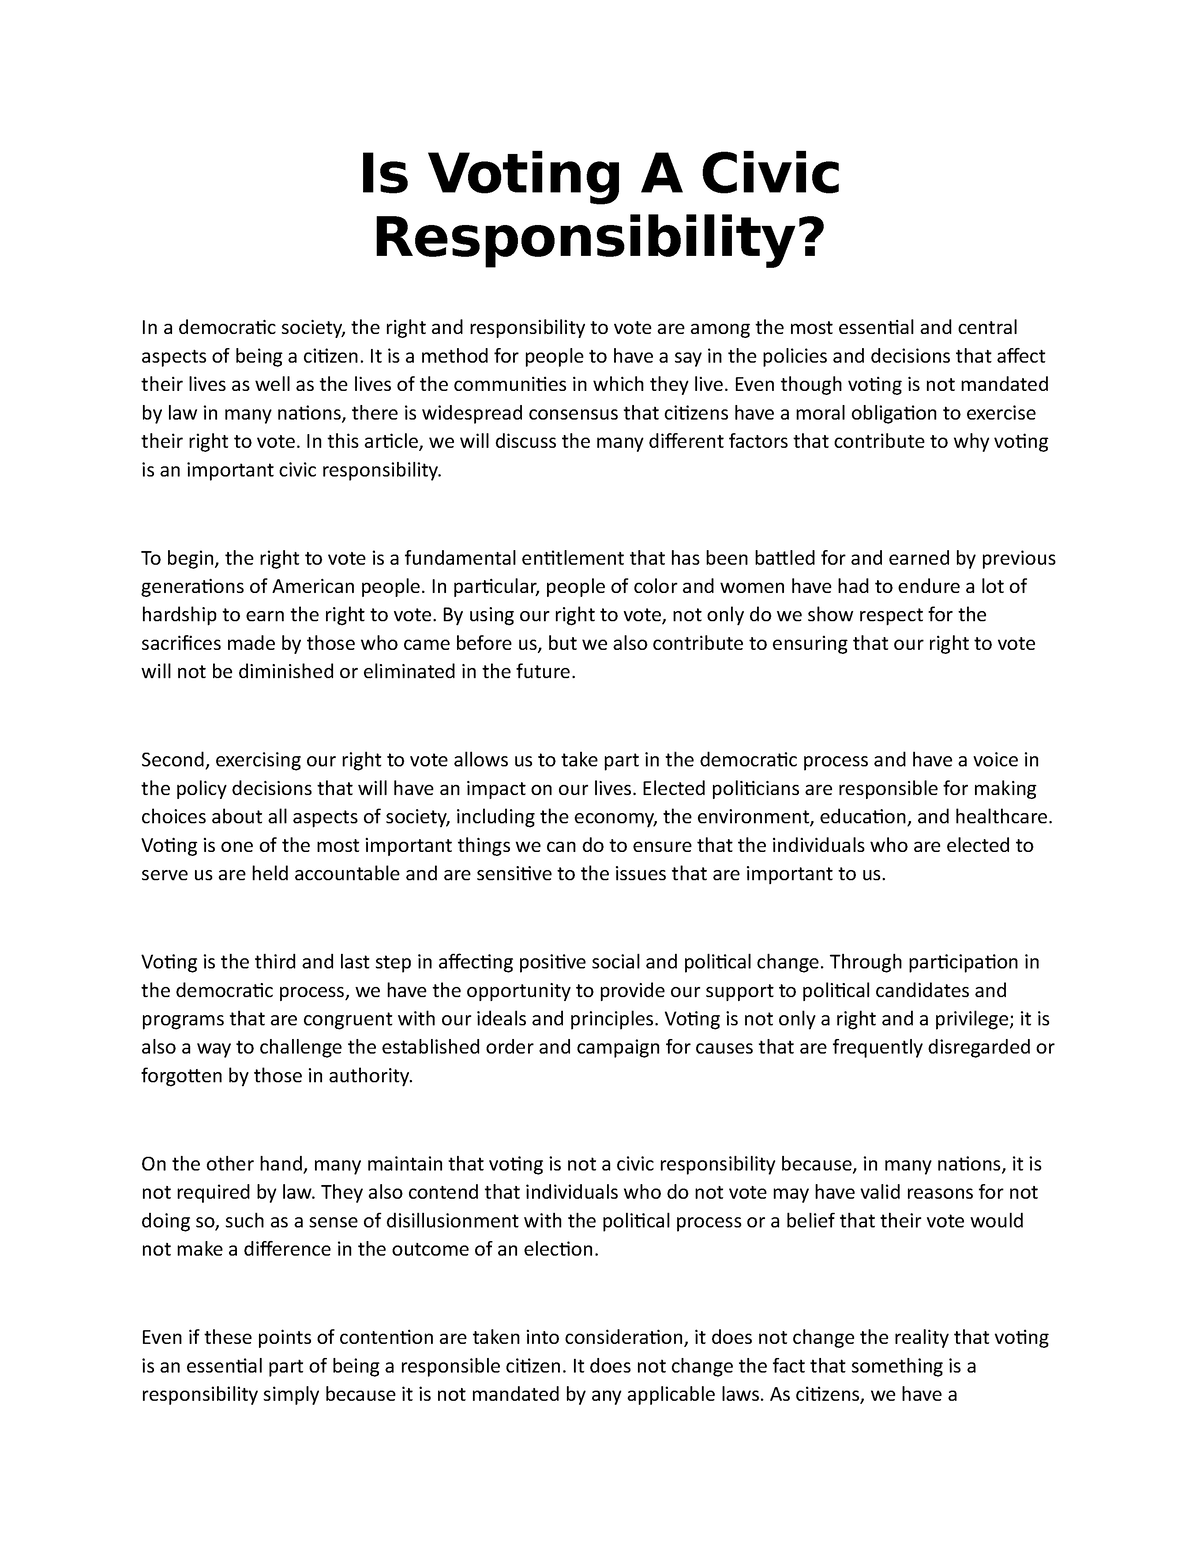 conclusion of civic responsibility essay